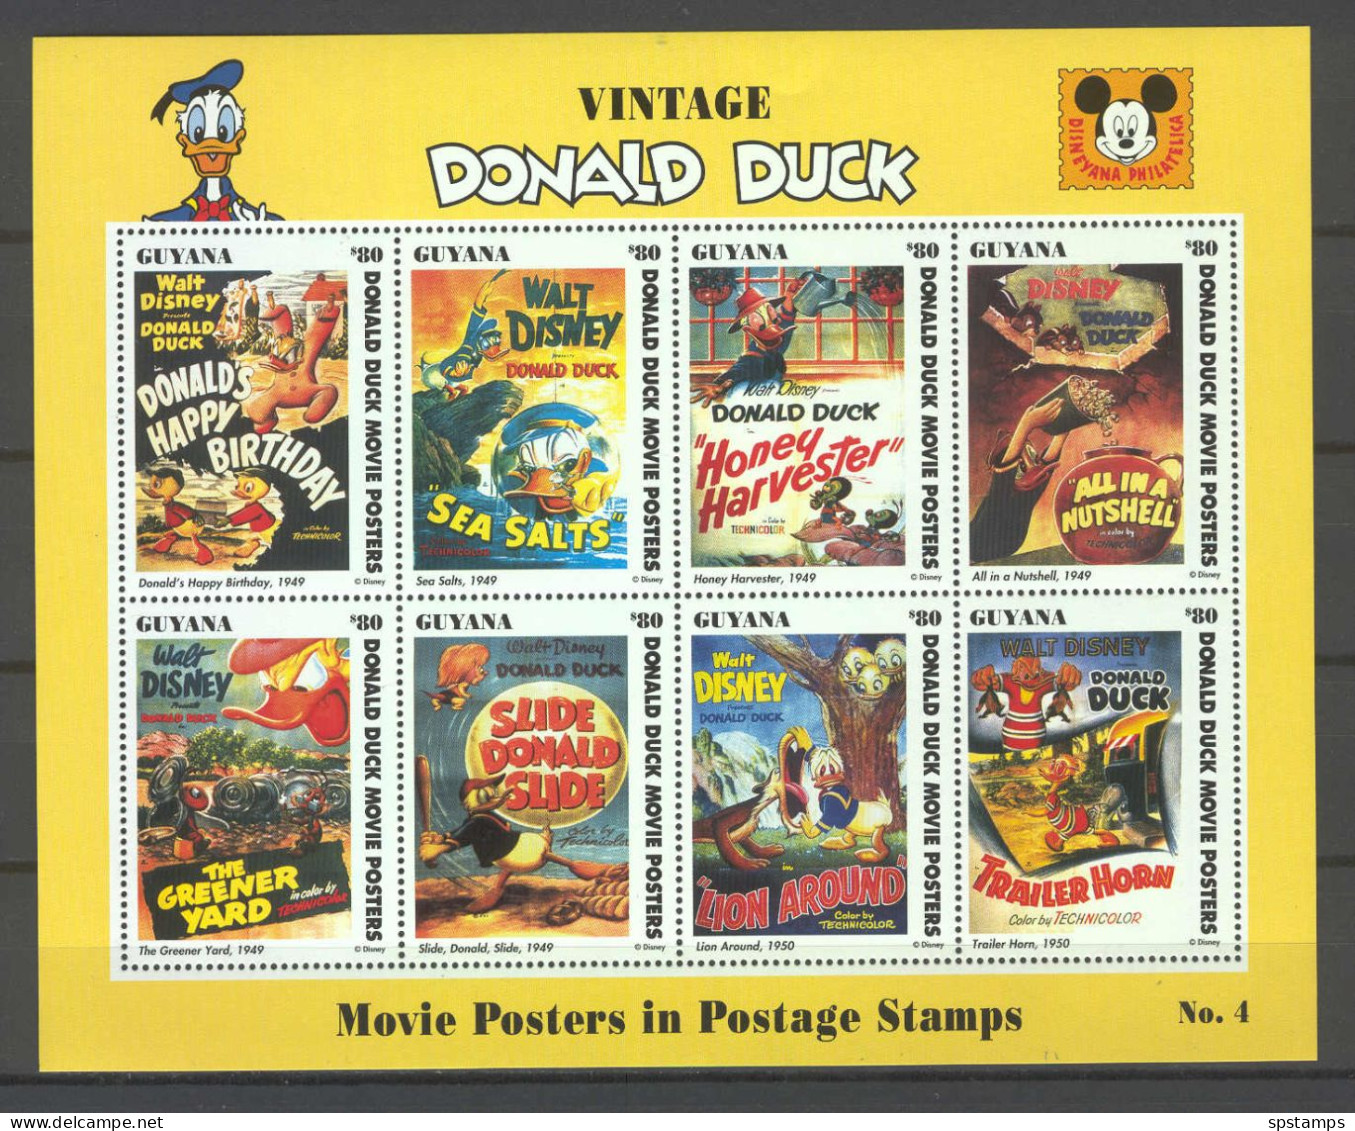 Disney Guyana 1993 Donald Duck - Movie Posters Sheetlet #4 (WITHOUT LABEL) MNH - Disney